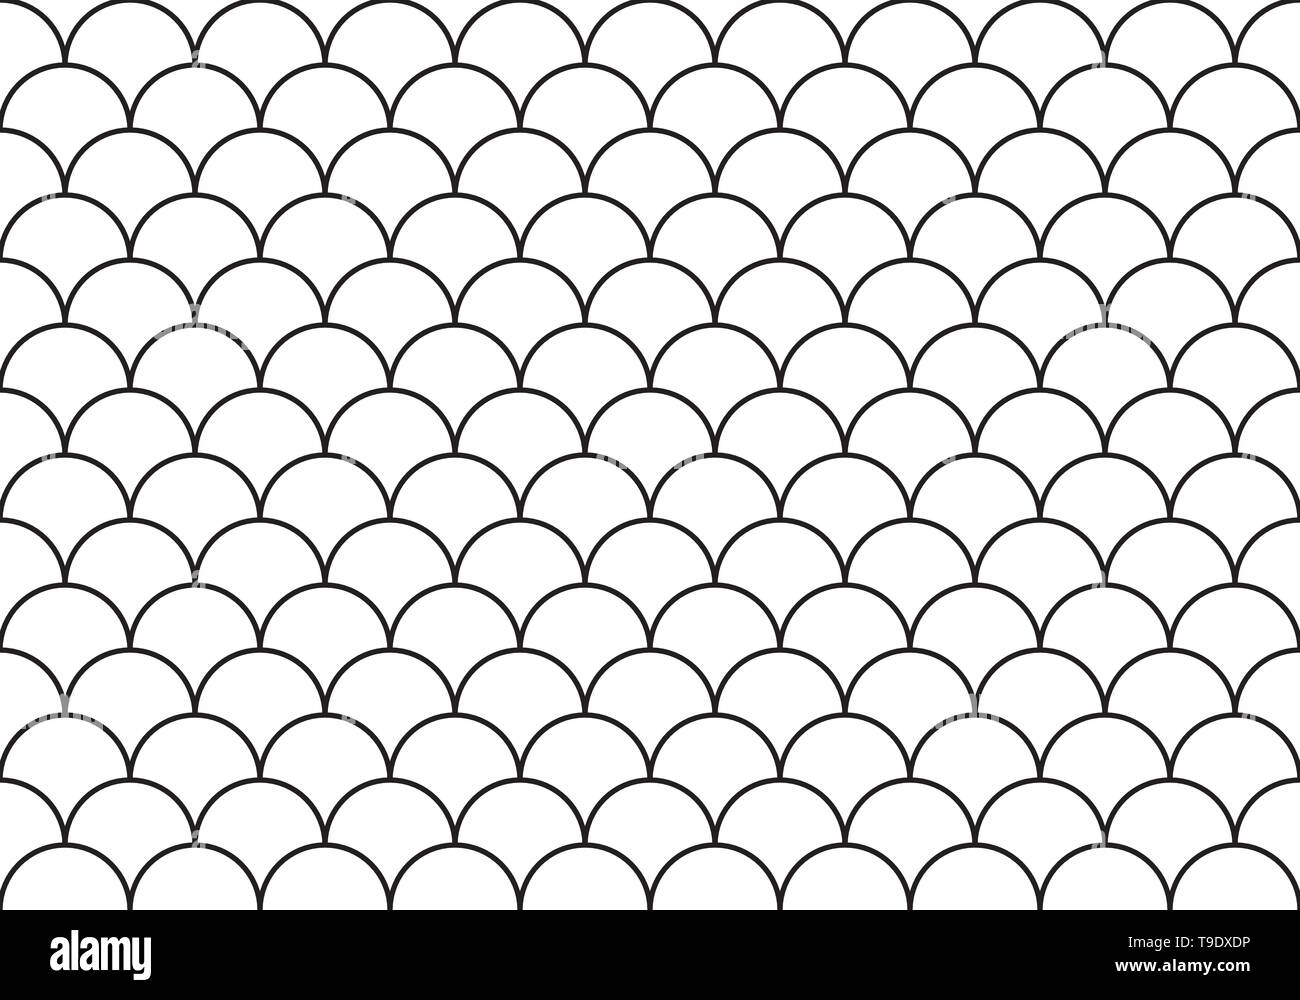 Multiple half circles on white background isolated vector Stock Vector